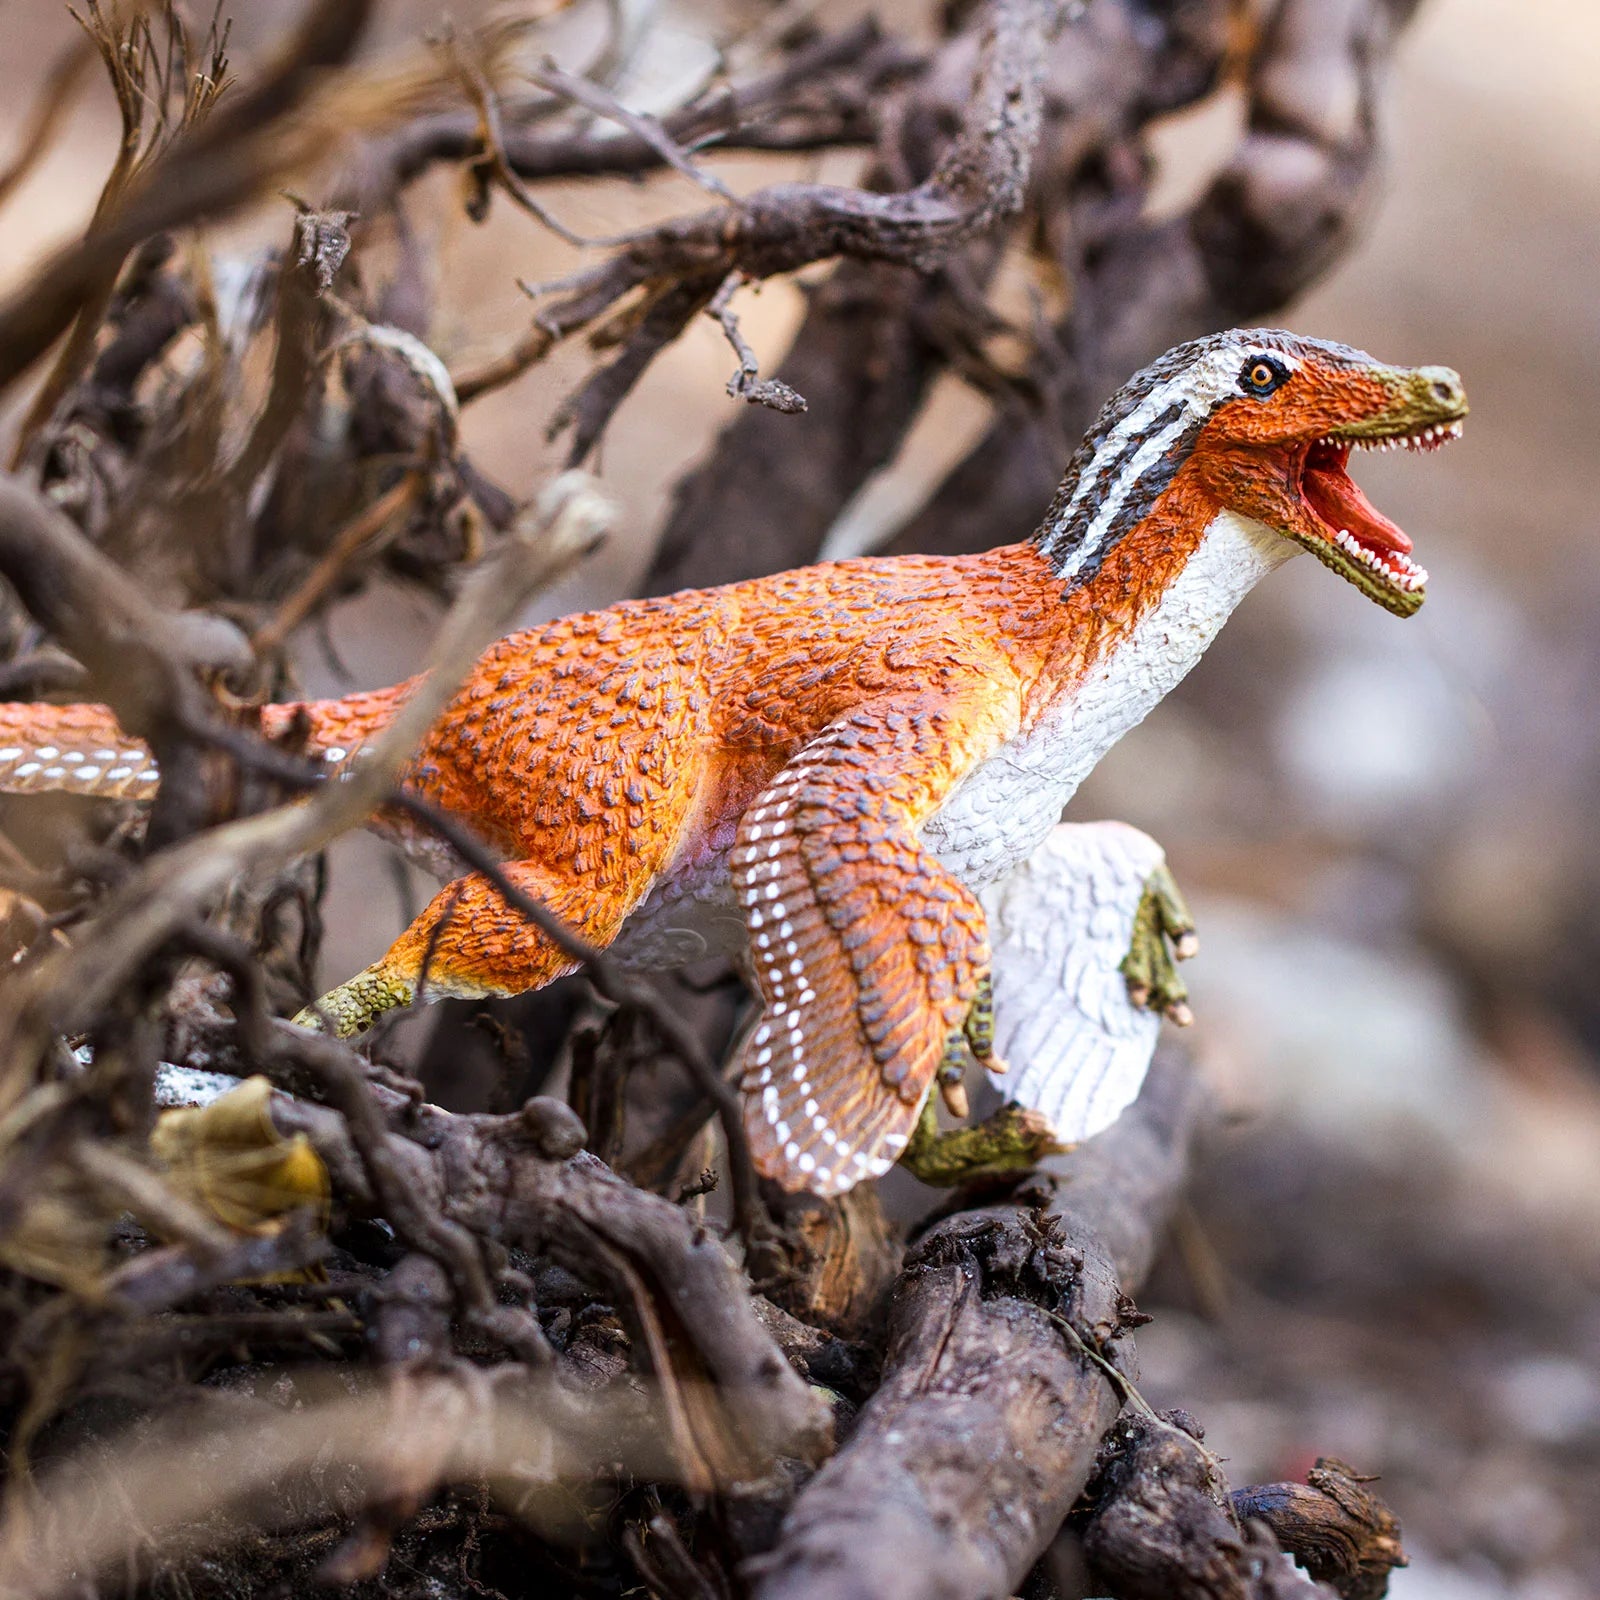 The Evolution of Dinosaur Toys: How They've Changed Over the Years